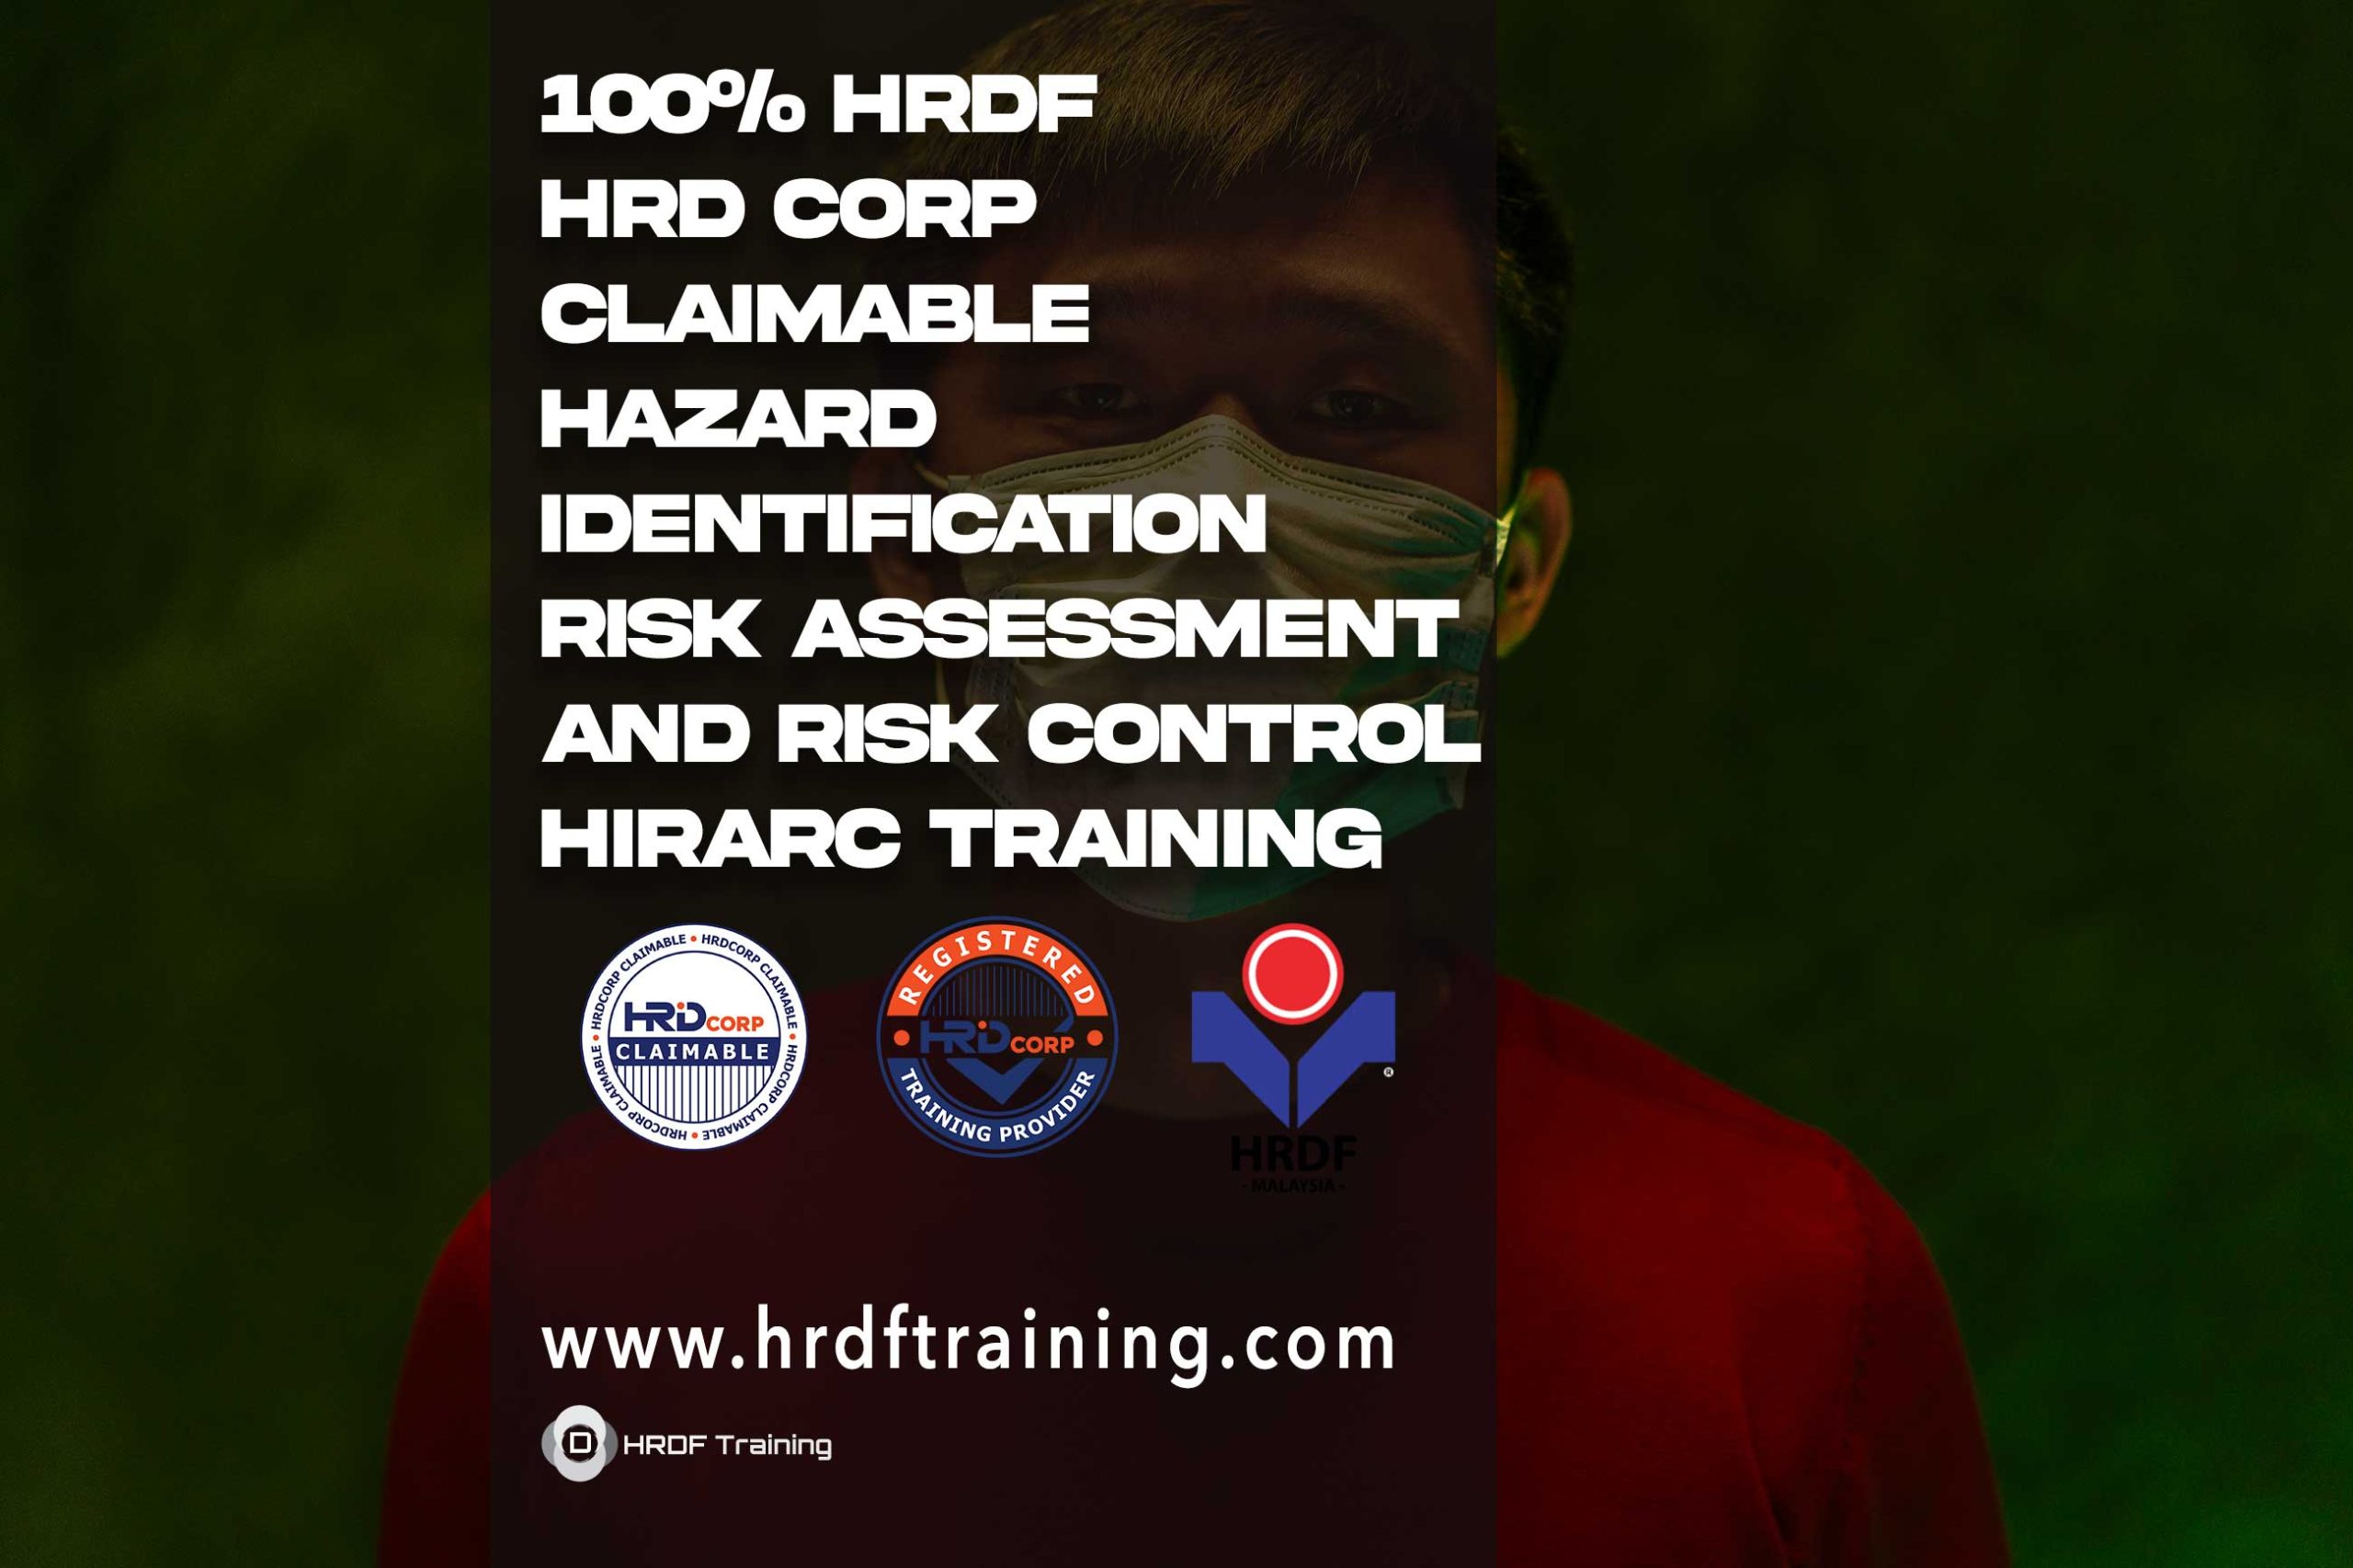 HRDF-HRD-Corp-Claimable-Hazard-Identification-Risk-Assessment-and-Risk-Control-HIRARC-Training